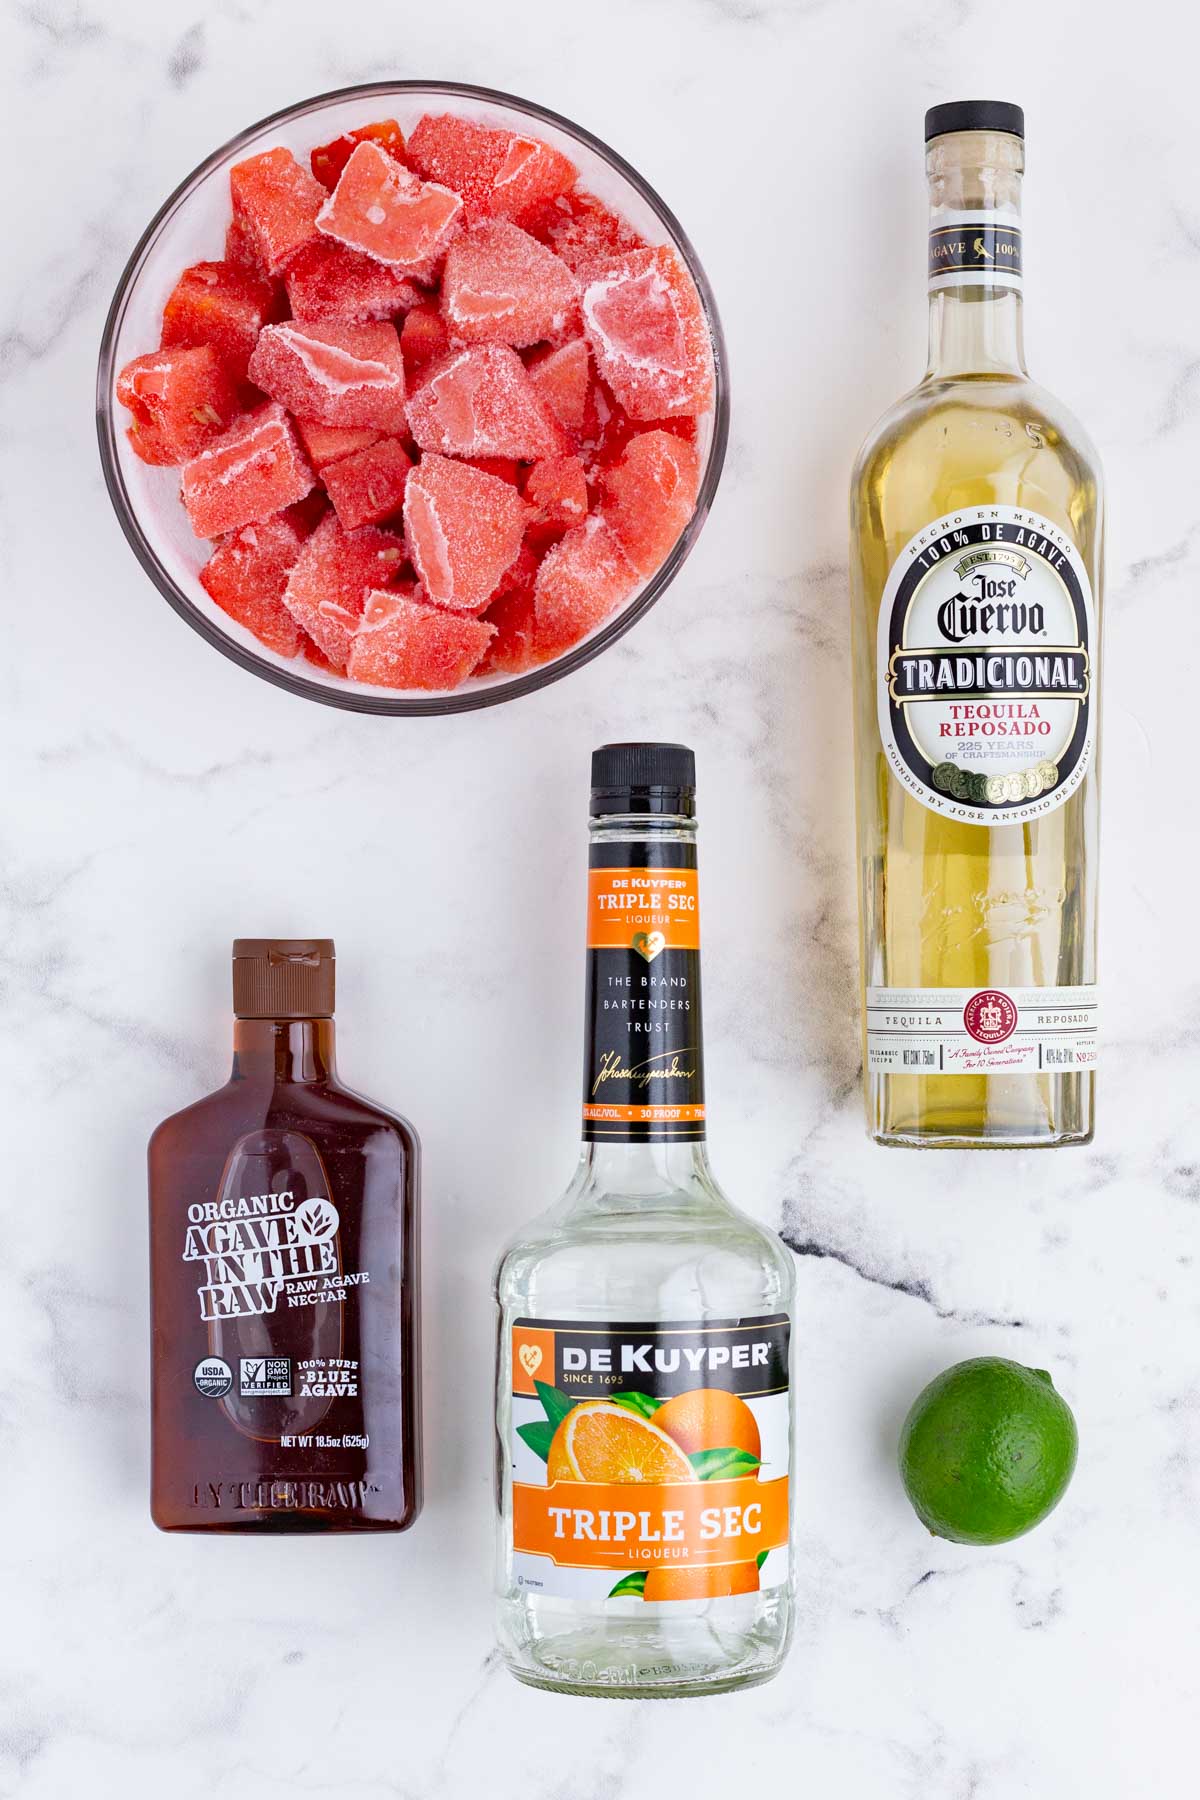 Tequila, triple sec, watermelon, lime juice, and agave are the ingredients for this drink.